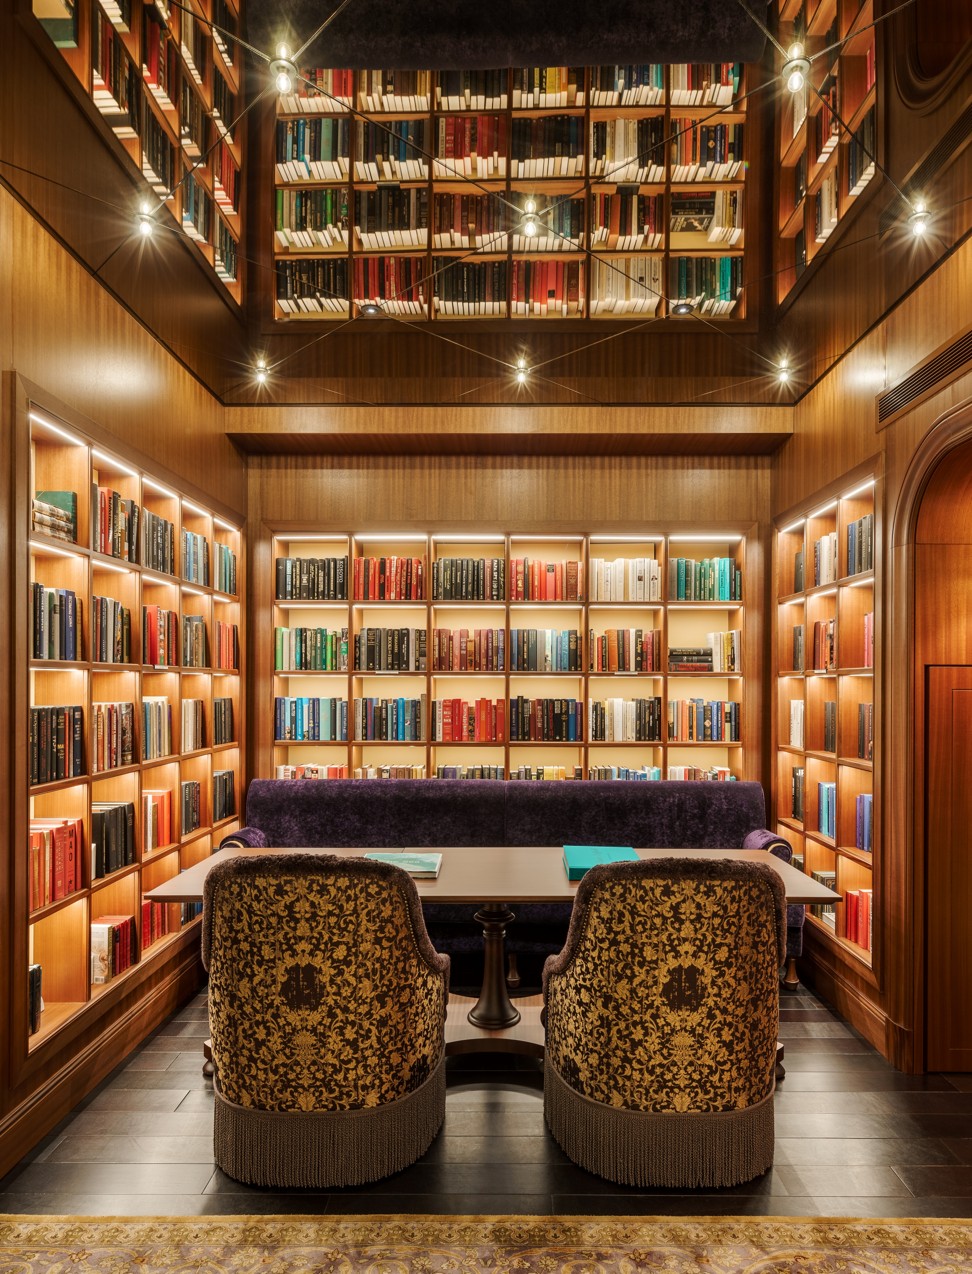 Cook & Tras Social Library features more than 3,000 books to peruse as you dine. Photo: Six Senses